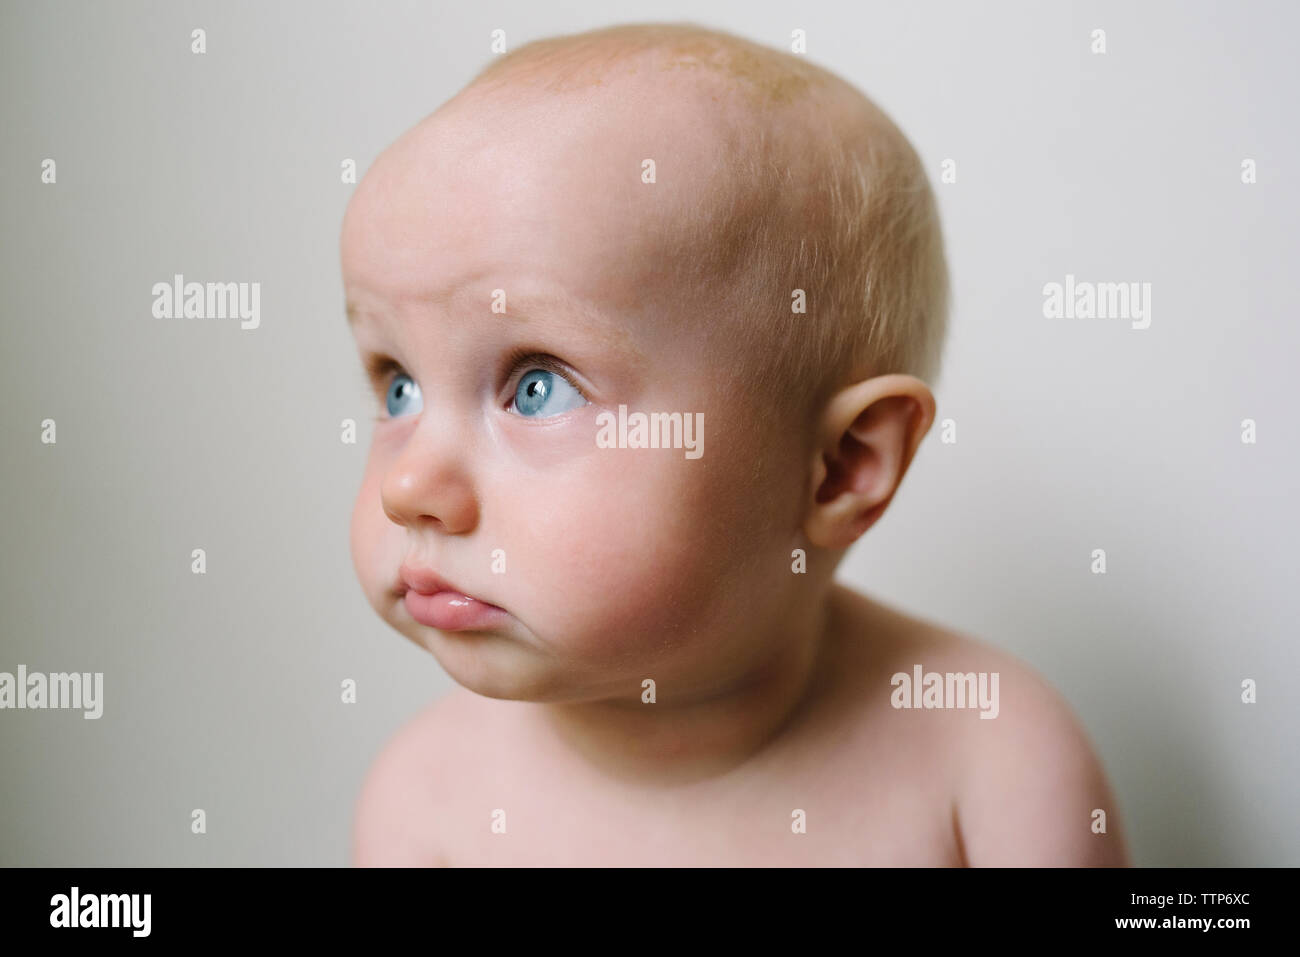 Cute baby girl looking away against wall Stock Photo